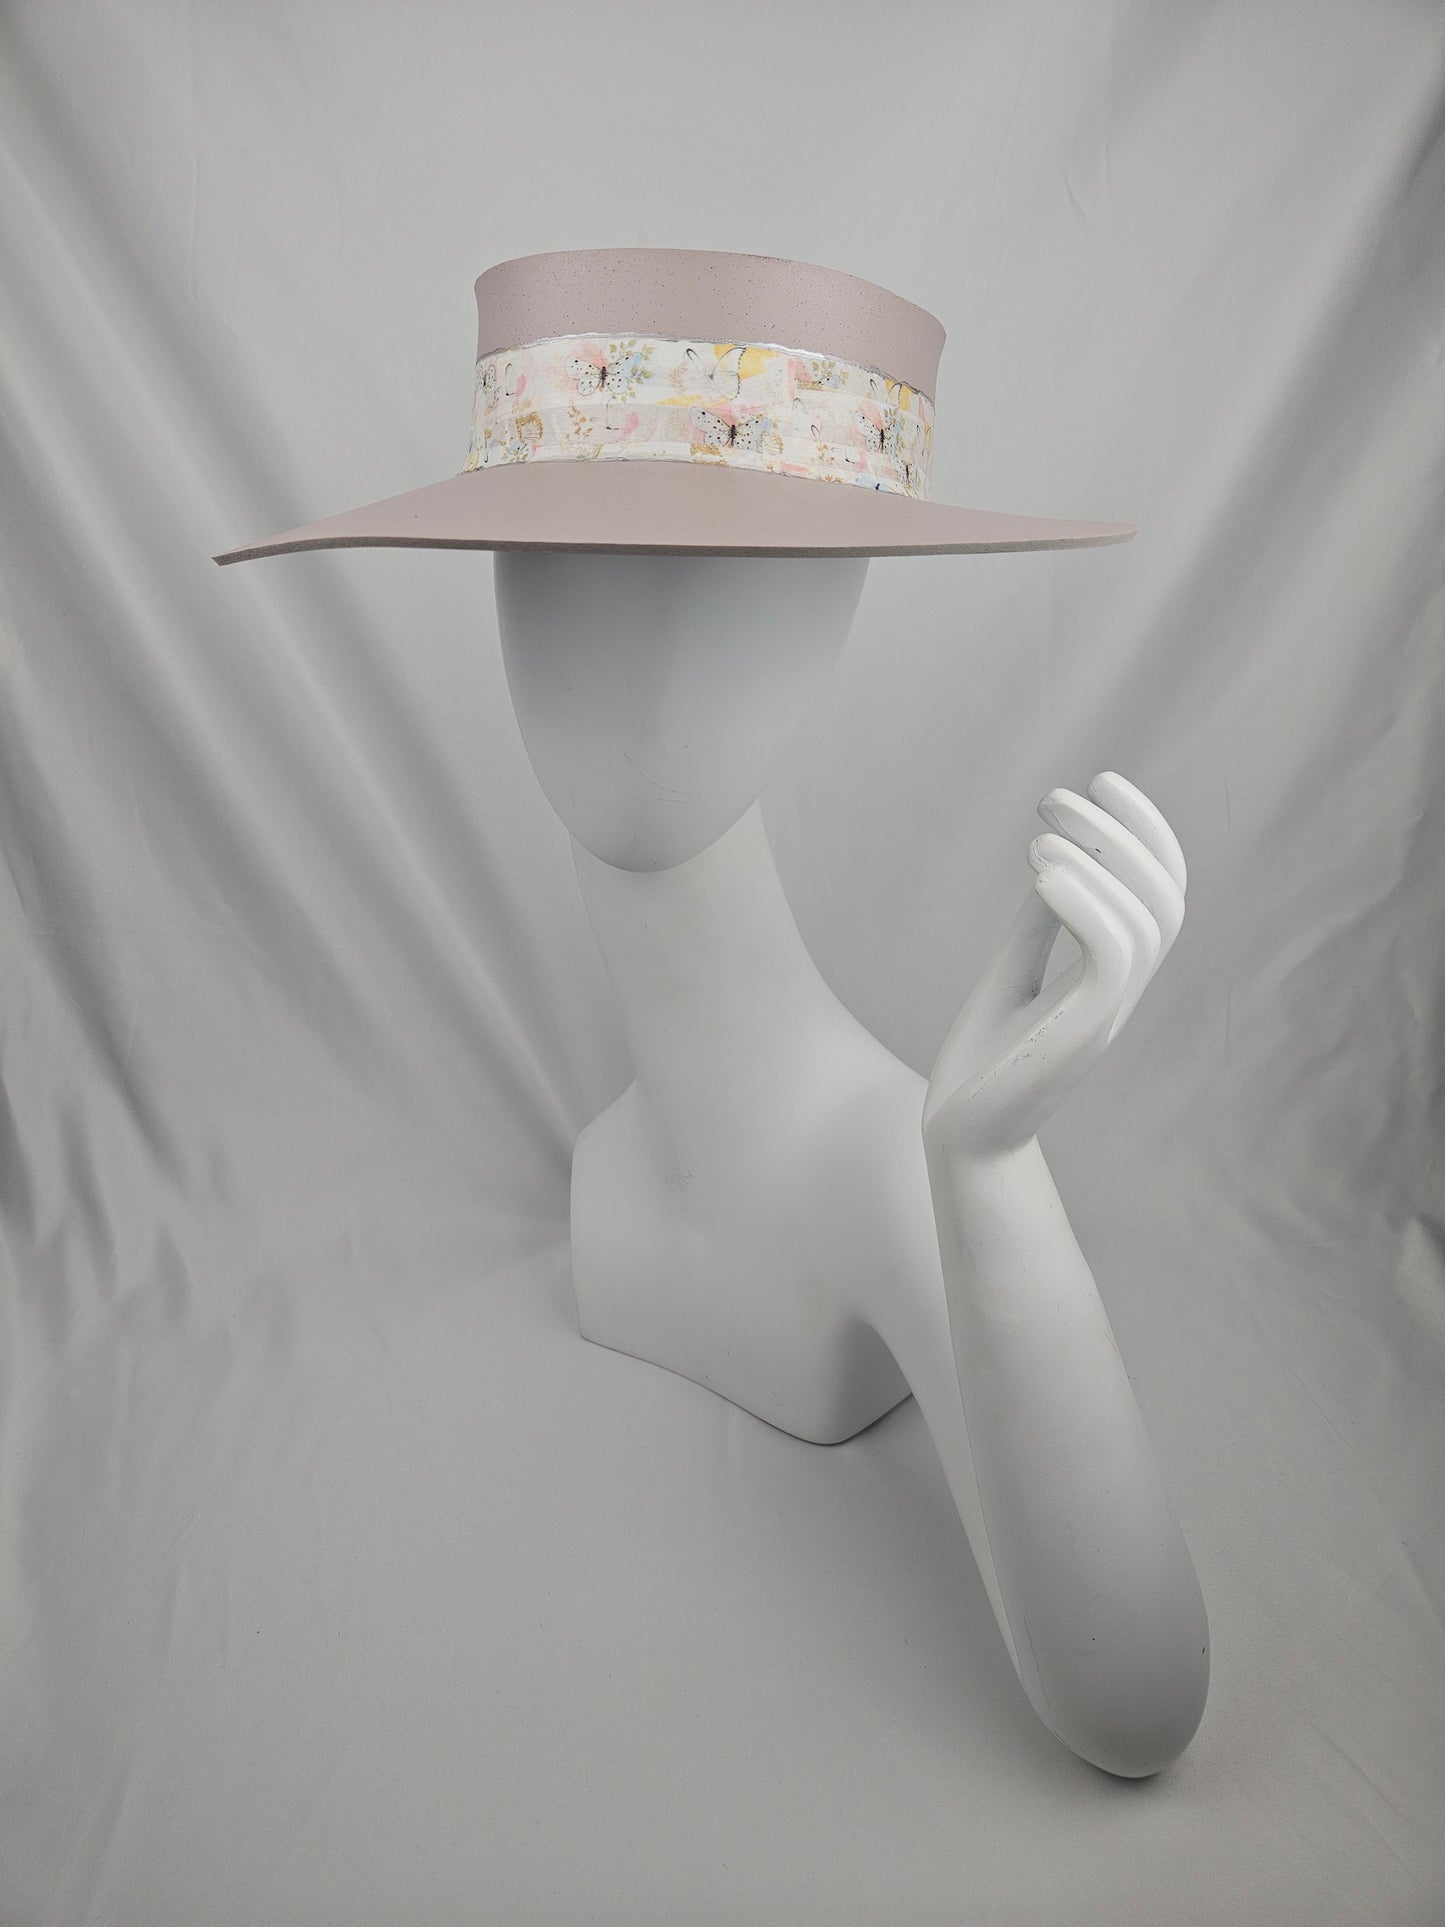 Soft Pink Audrey Foam Sun Visor Hat with Pastel Floral and Butterfly Band: 1950s, Walks, Brunch, Asian, Golf, Easter, Church, No Headache, Derby